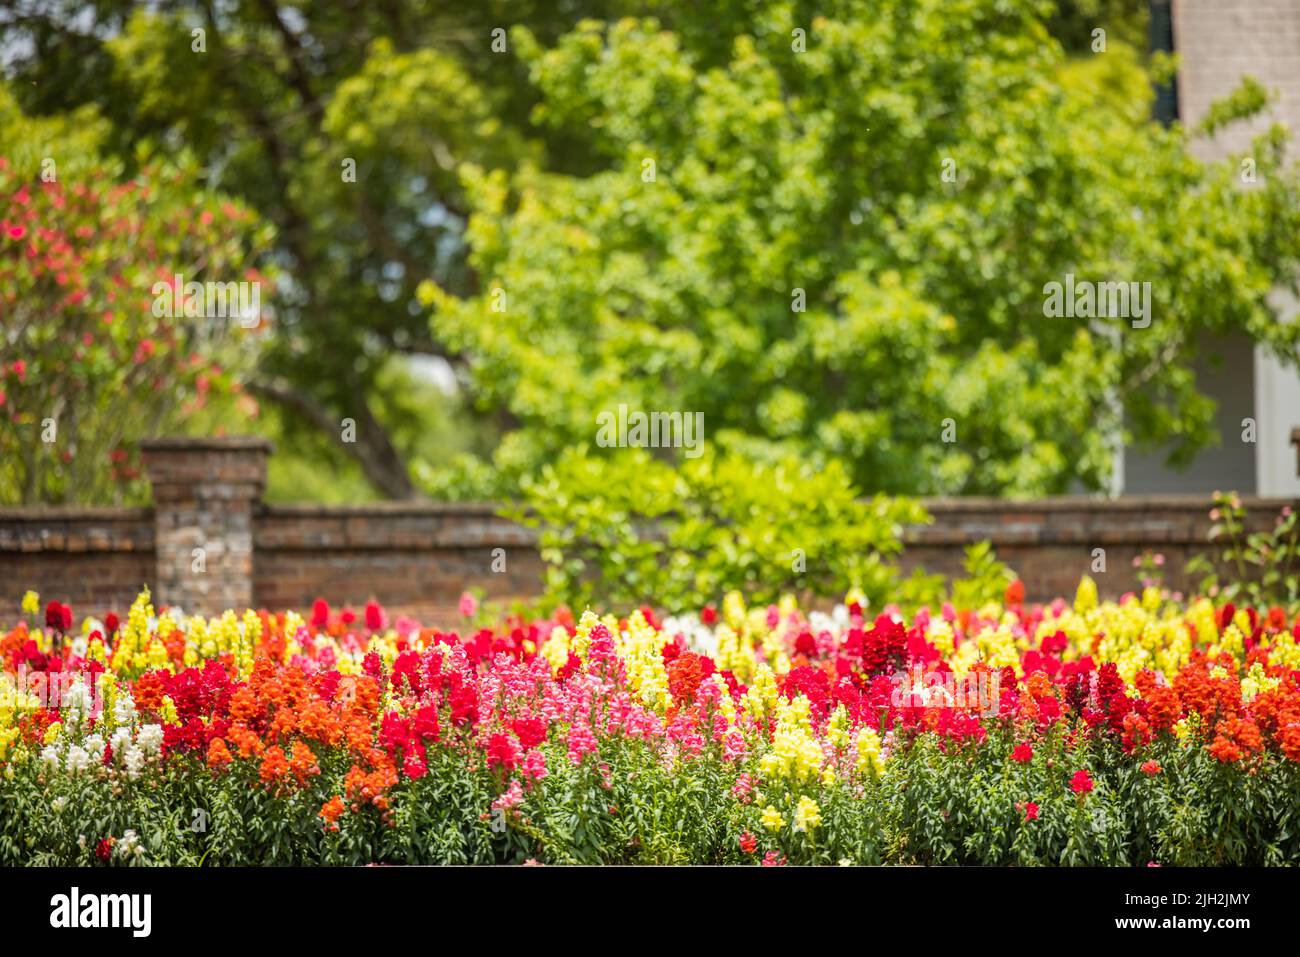 A large and colorful garden of trailing candy showers snapdragons in bloom in the spring in large brick flower beds. Stock Photo